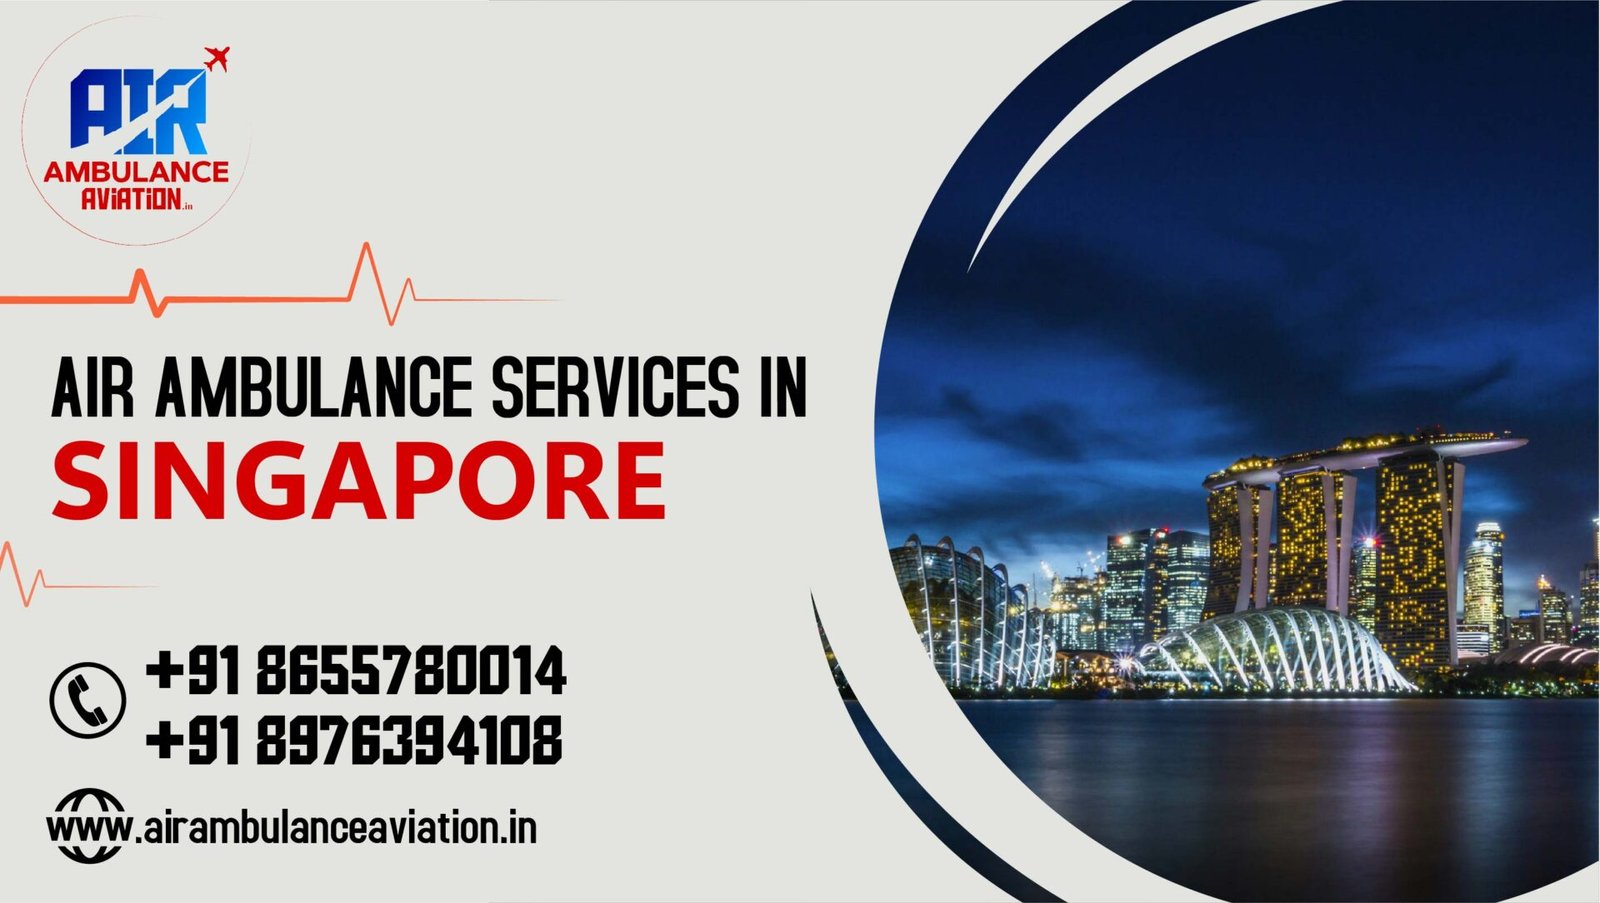 Air Ambulance Services in Singapore